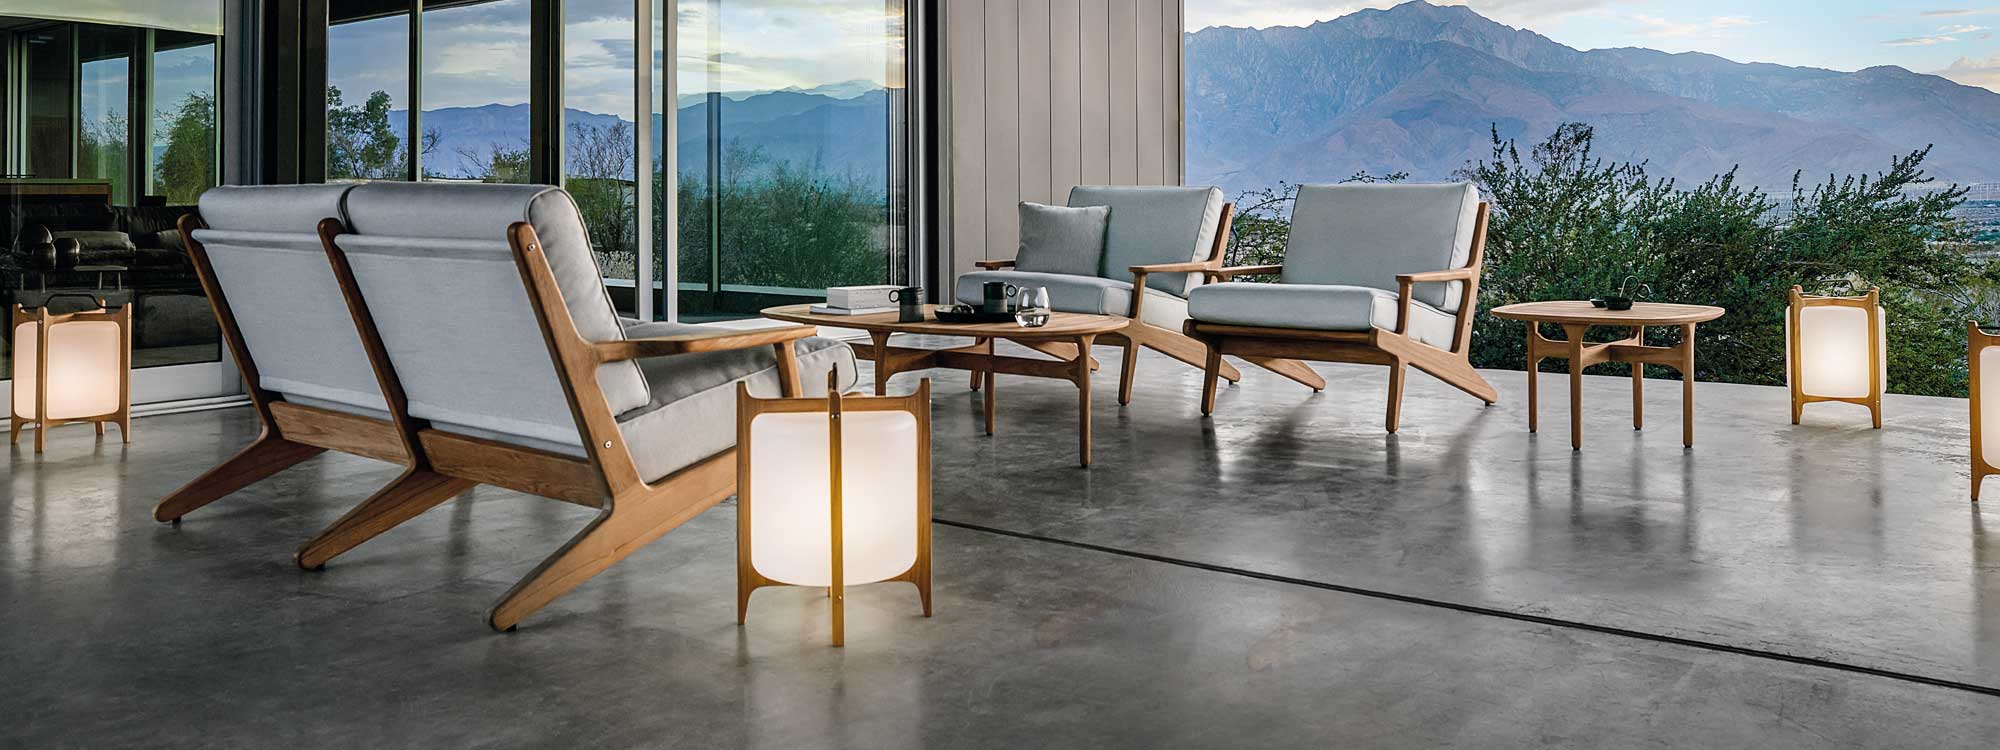 Image of Gloster Bay teak sofa and lounge chairs, together with Lantern modern lights, on poured concrete terrace with mountainous countryside in the background